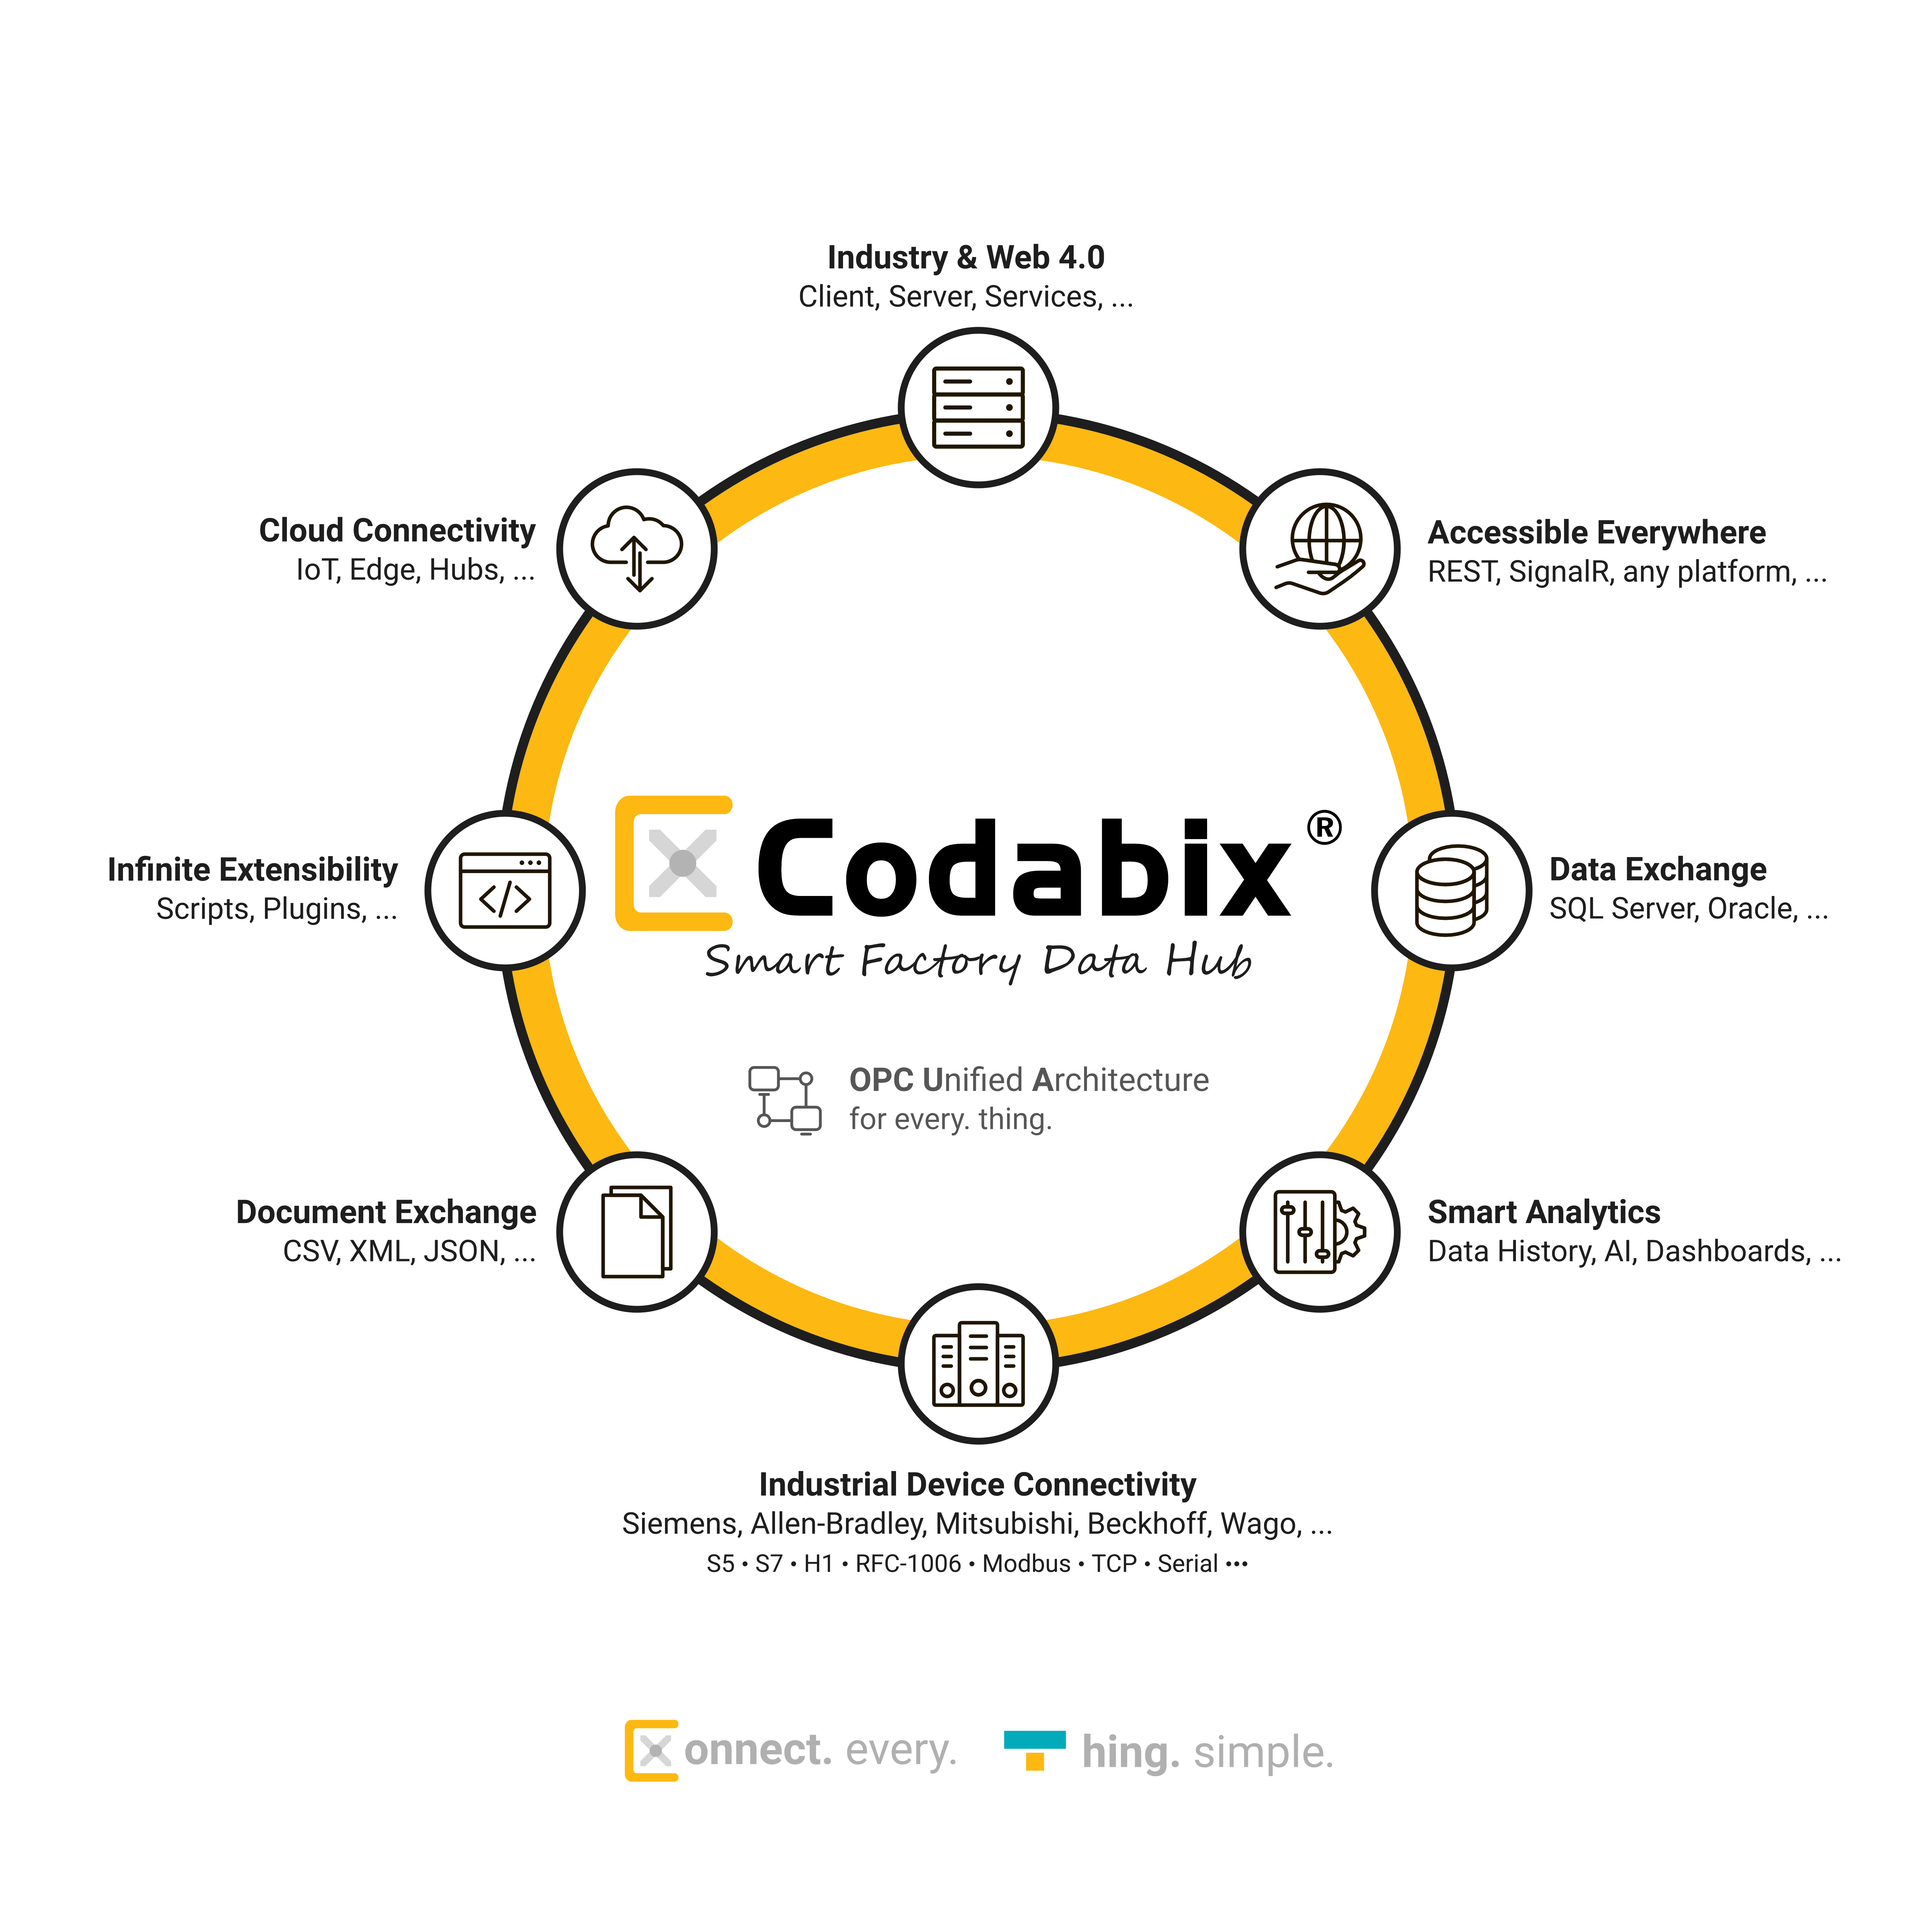 Overview of Codabix features, interfaces and protocols.